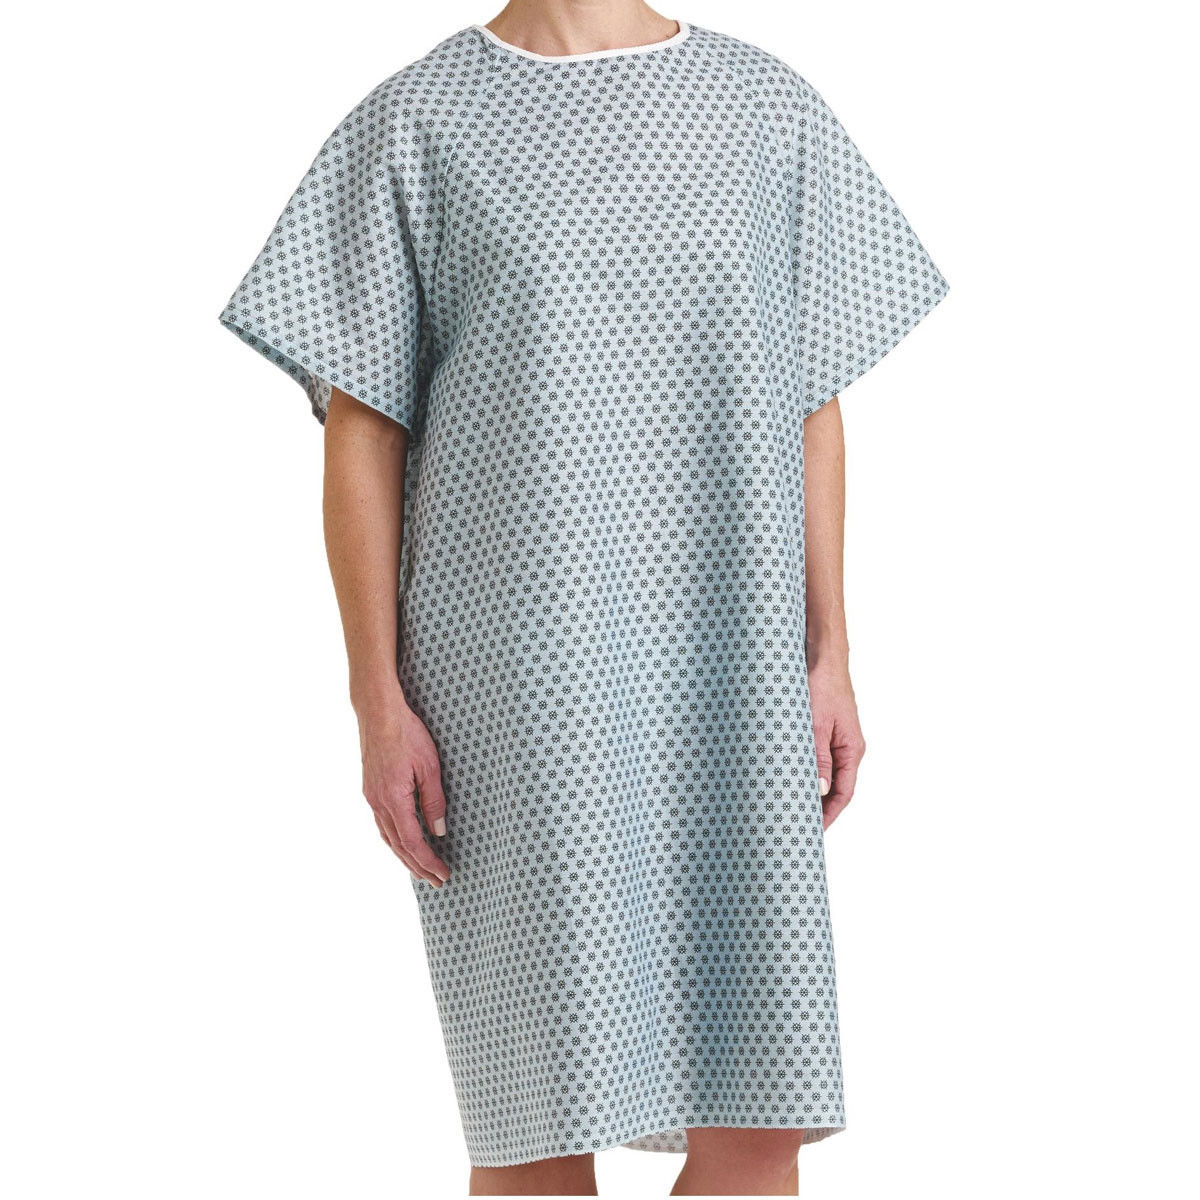 Do you make any patient gowns with plastic snaps on the arms?